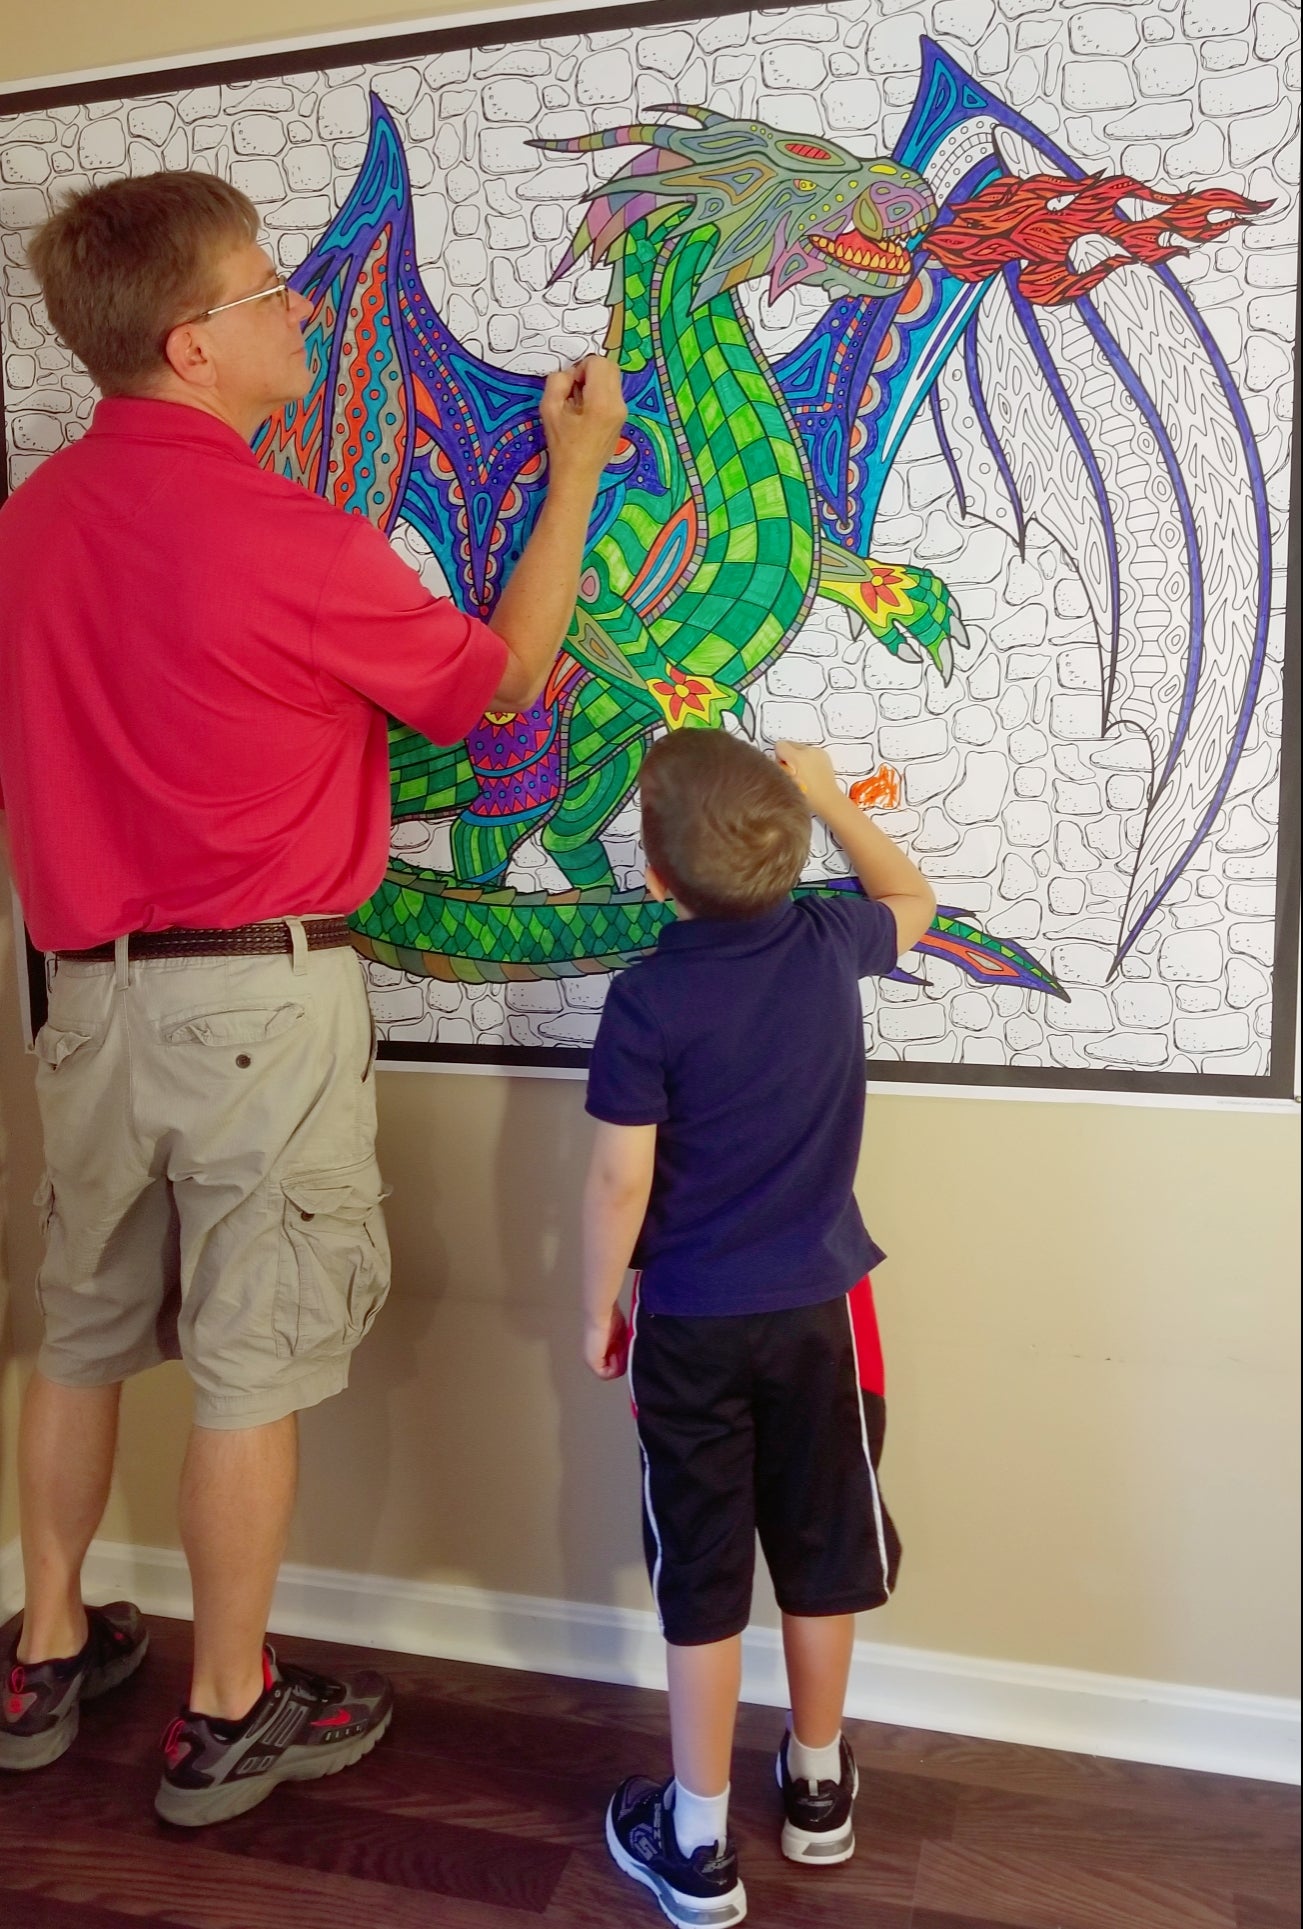 Dragon Personalized Giant Coloring Poster 46"x60"